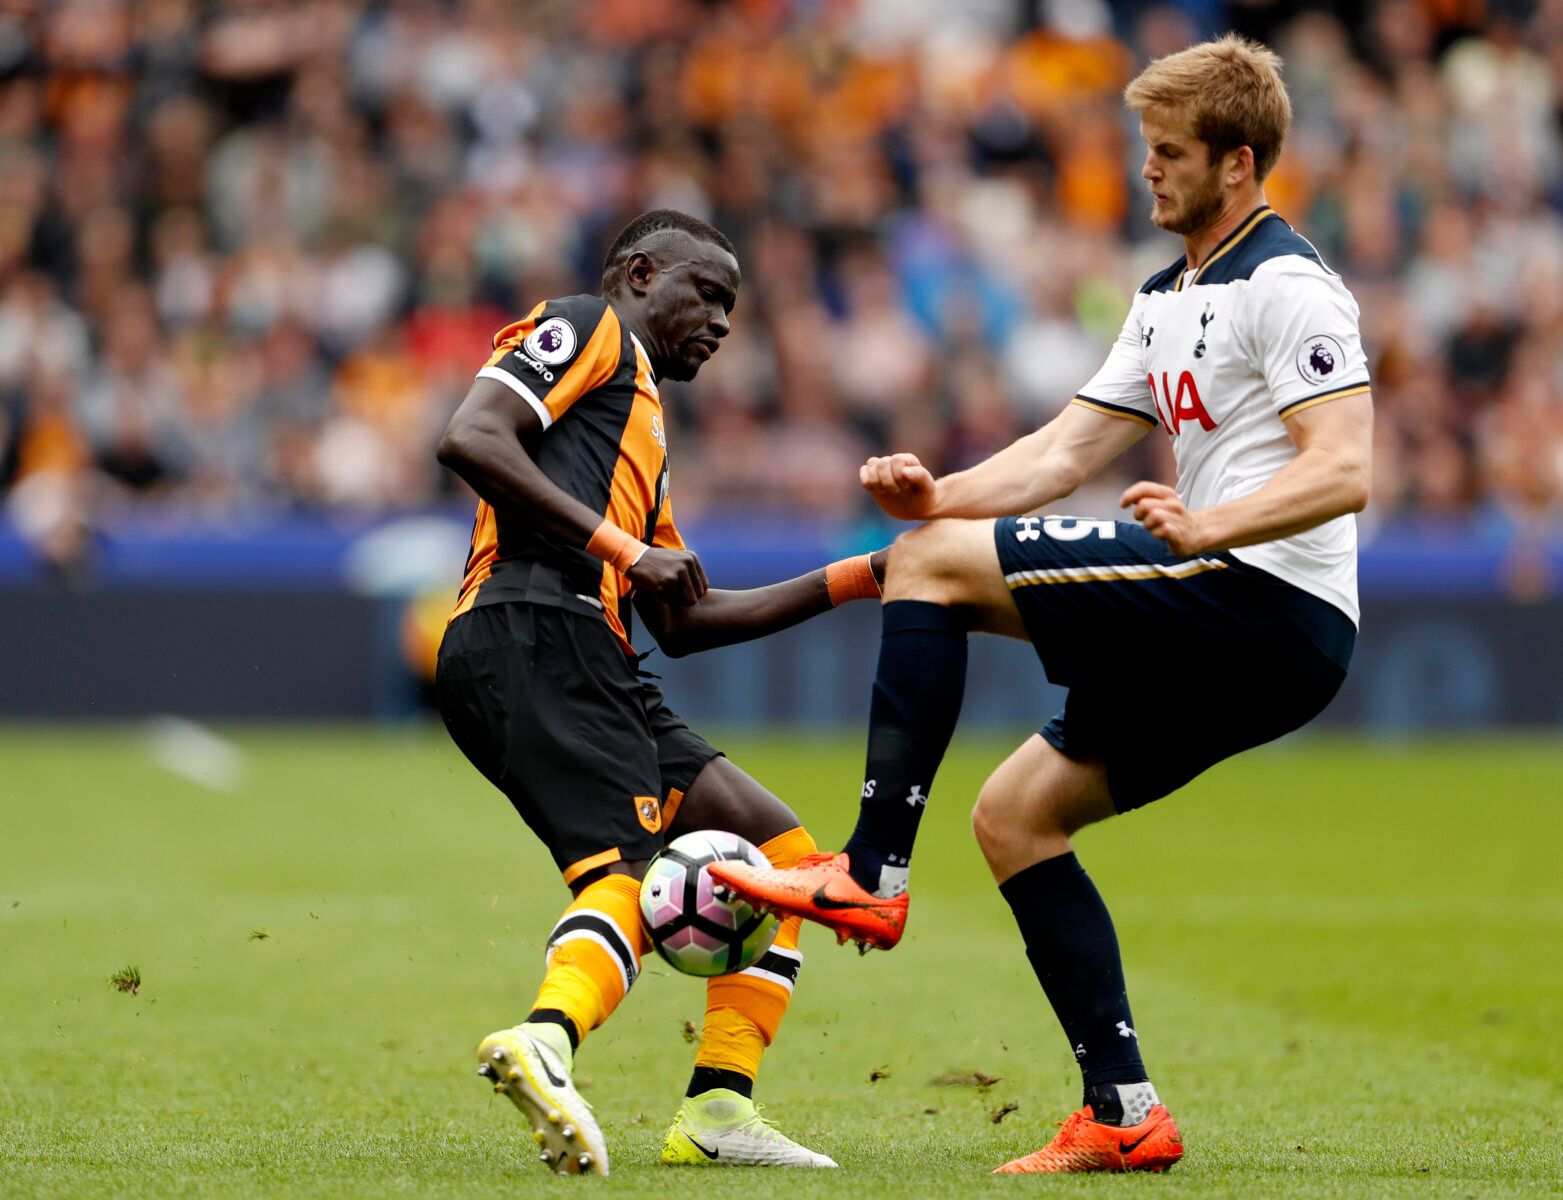 Britain Football Soccer - Hull City v Tottenham Hotspur - Premier League - The Kingston Communications Stadium - 21/5/17 Tottenham's Eric Dier in action with Hull City's Oumar Niasse Action Images via Reuters / Lee Smith Livepic EDITORIAL USE ONLY. No use with unauthorized audio, video, data, fixture lists, club/league logos or 